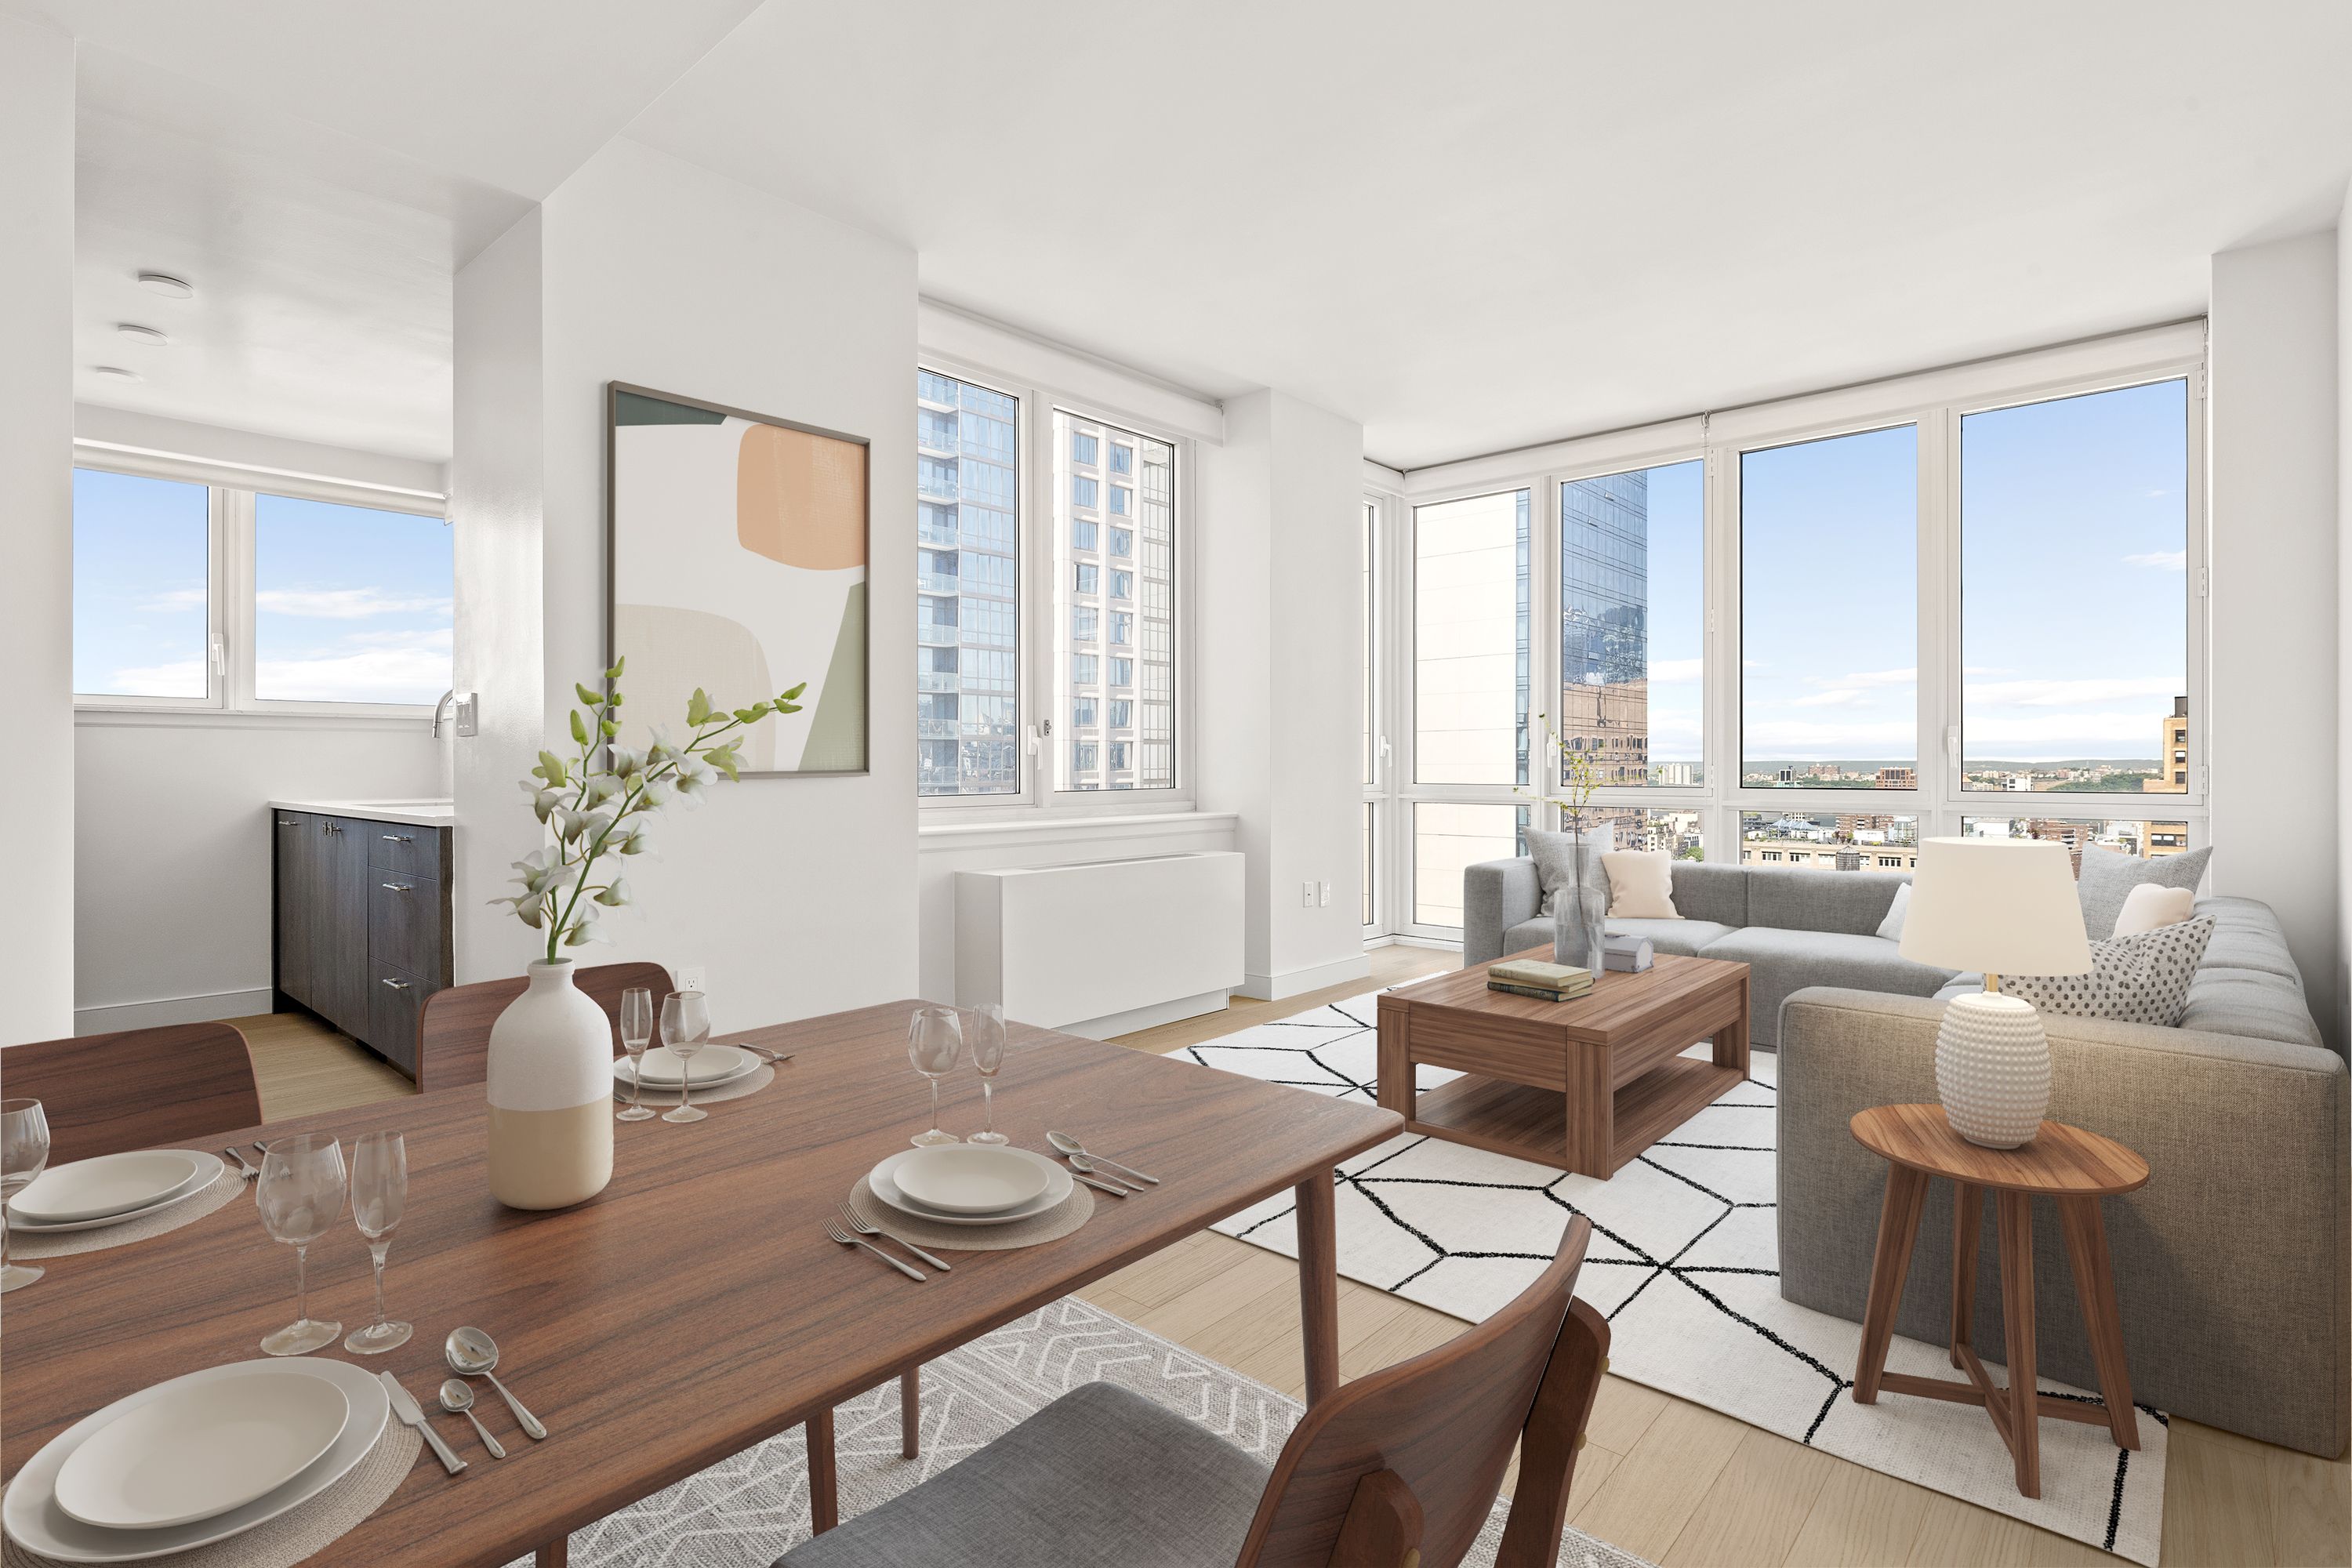 55 West 25th Street 35-G, Nomad, Downtown, NYC - 2 Bedrooms  
2 Bathrooms  
4 Rooms - 